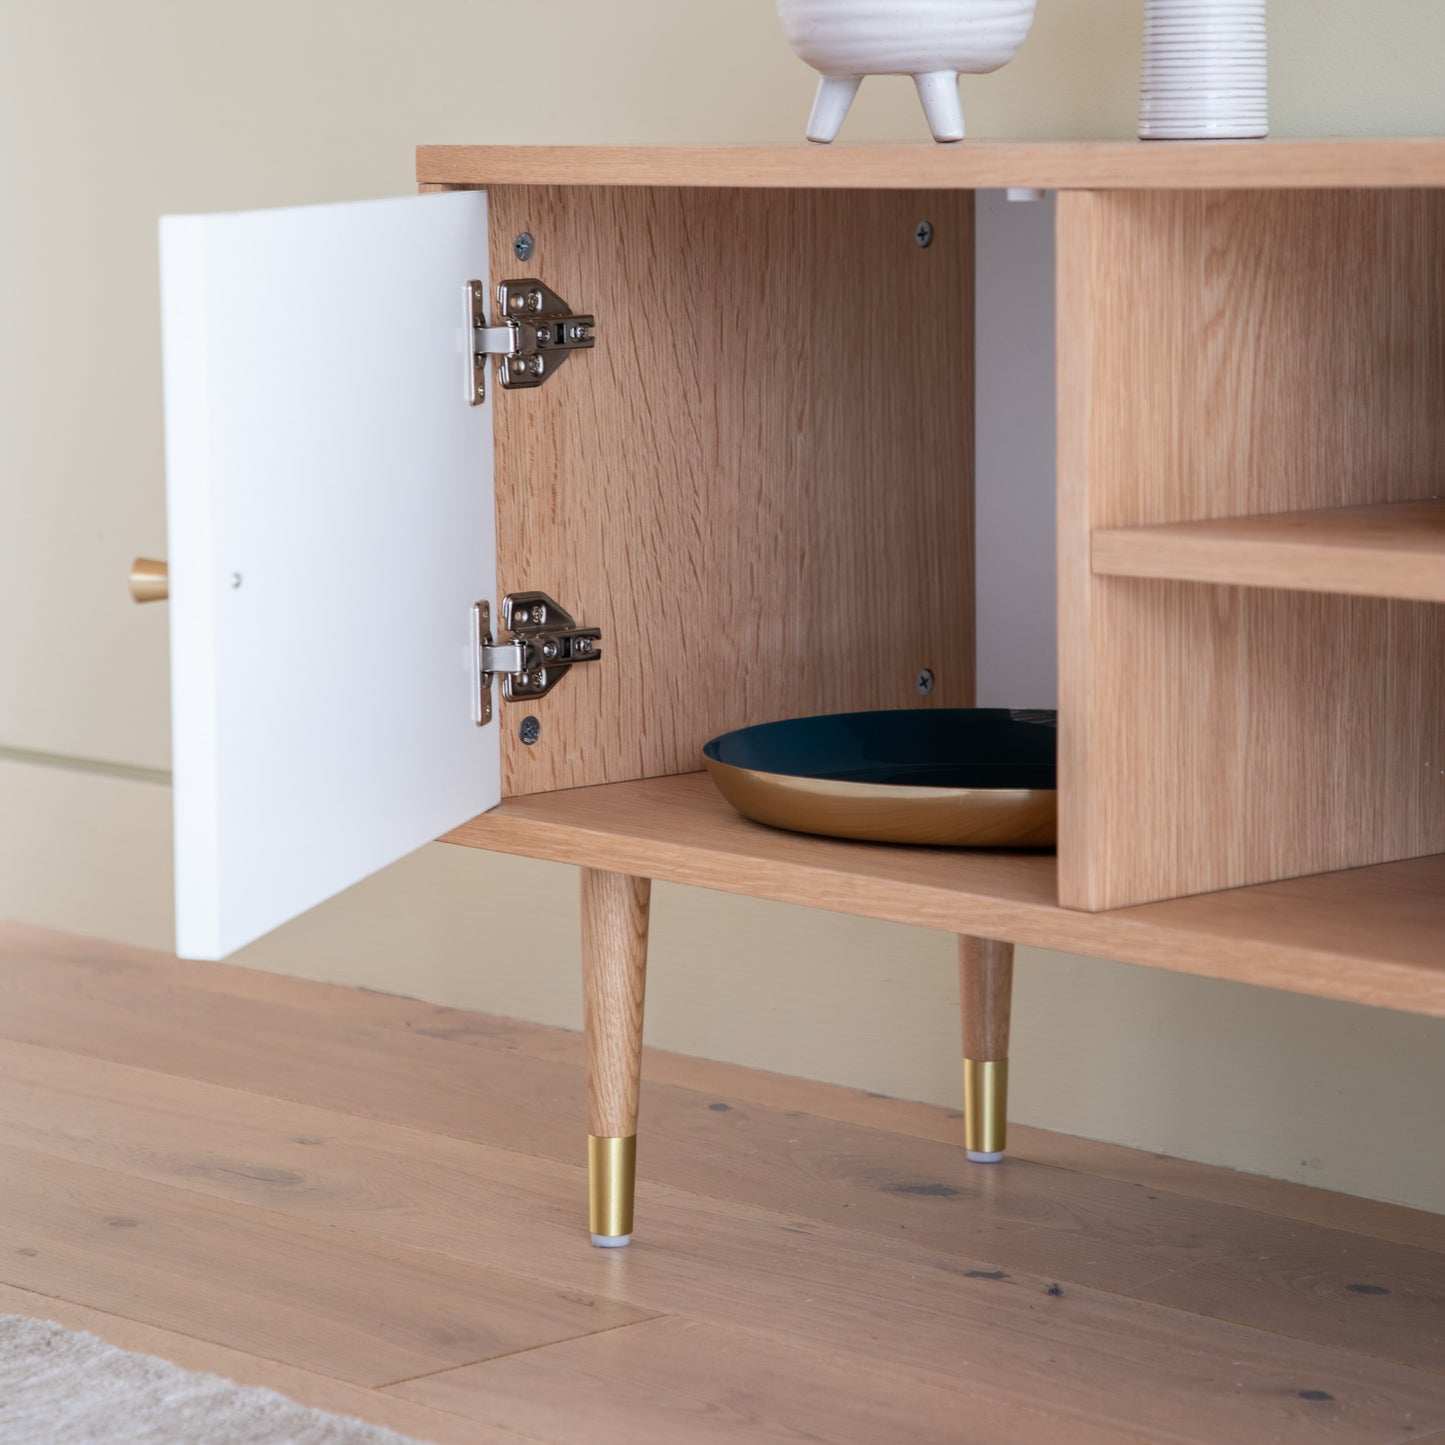 An oak and white media unit cabinet with a bowl on top, perfect for interior decor and home furniture.